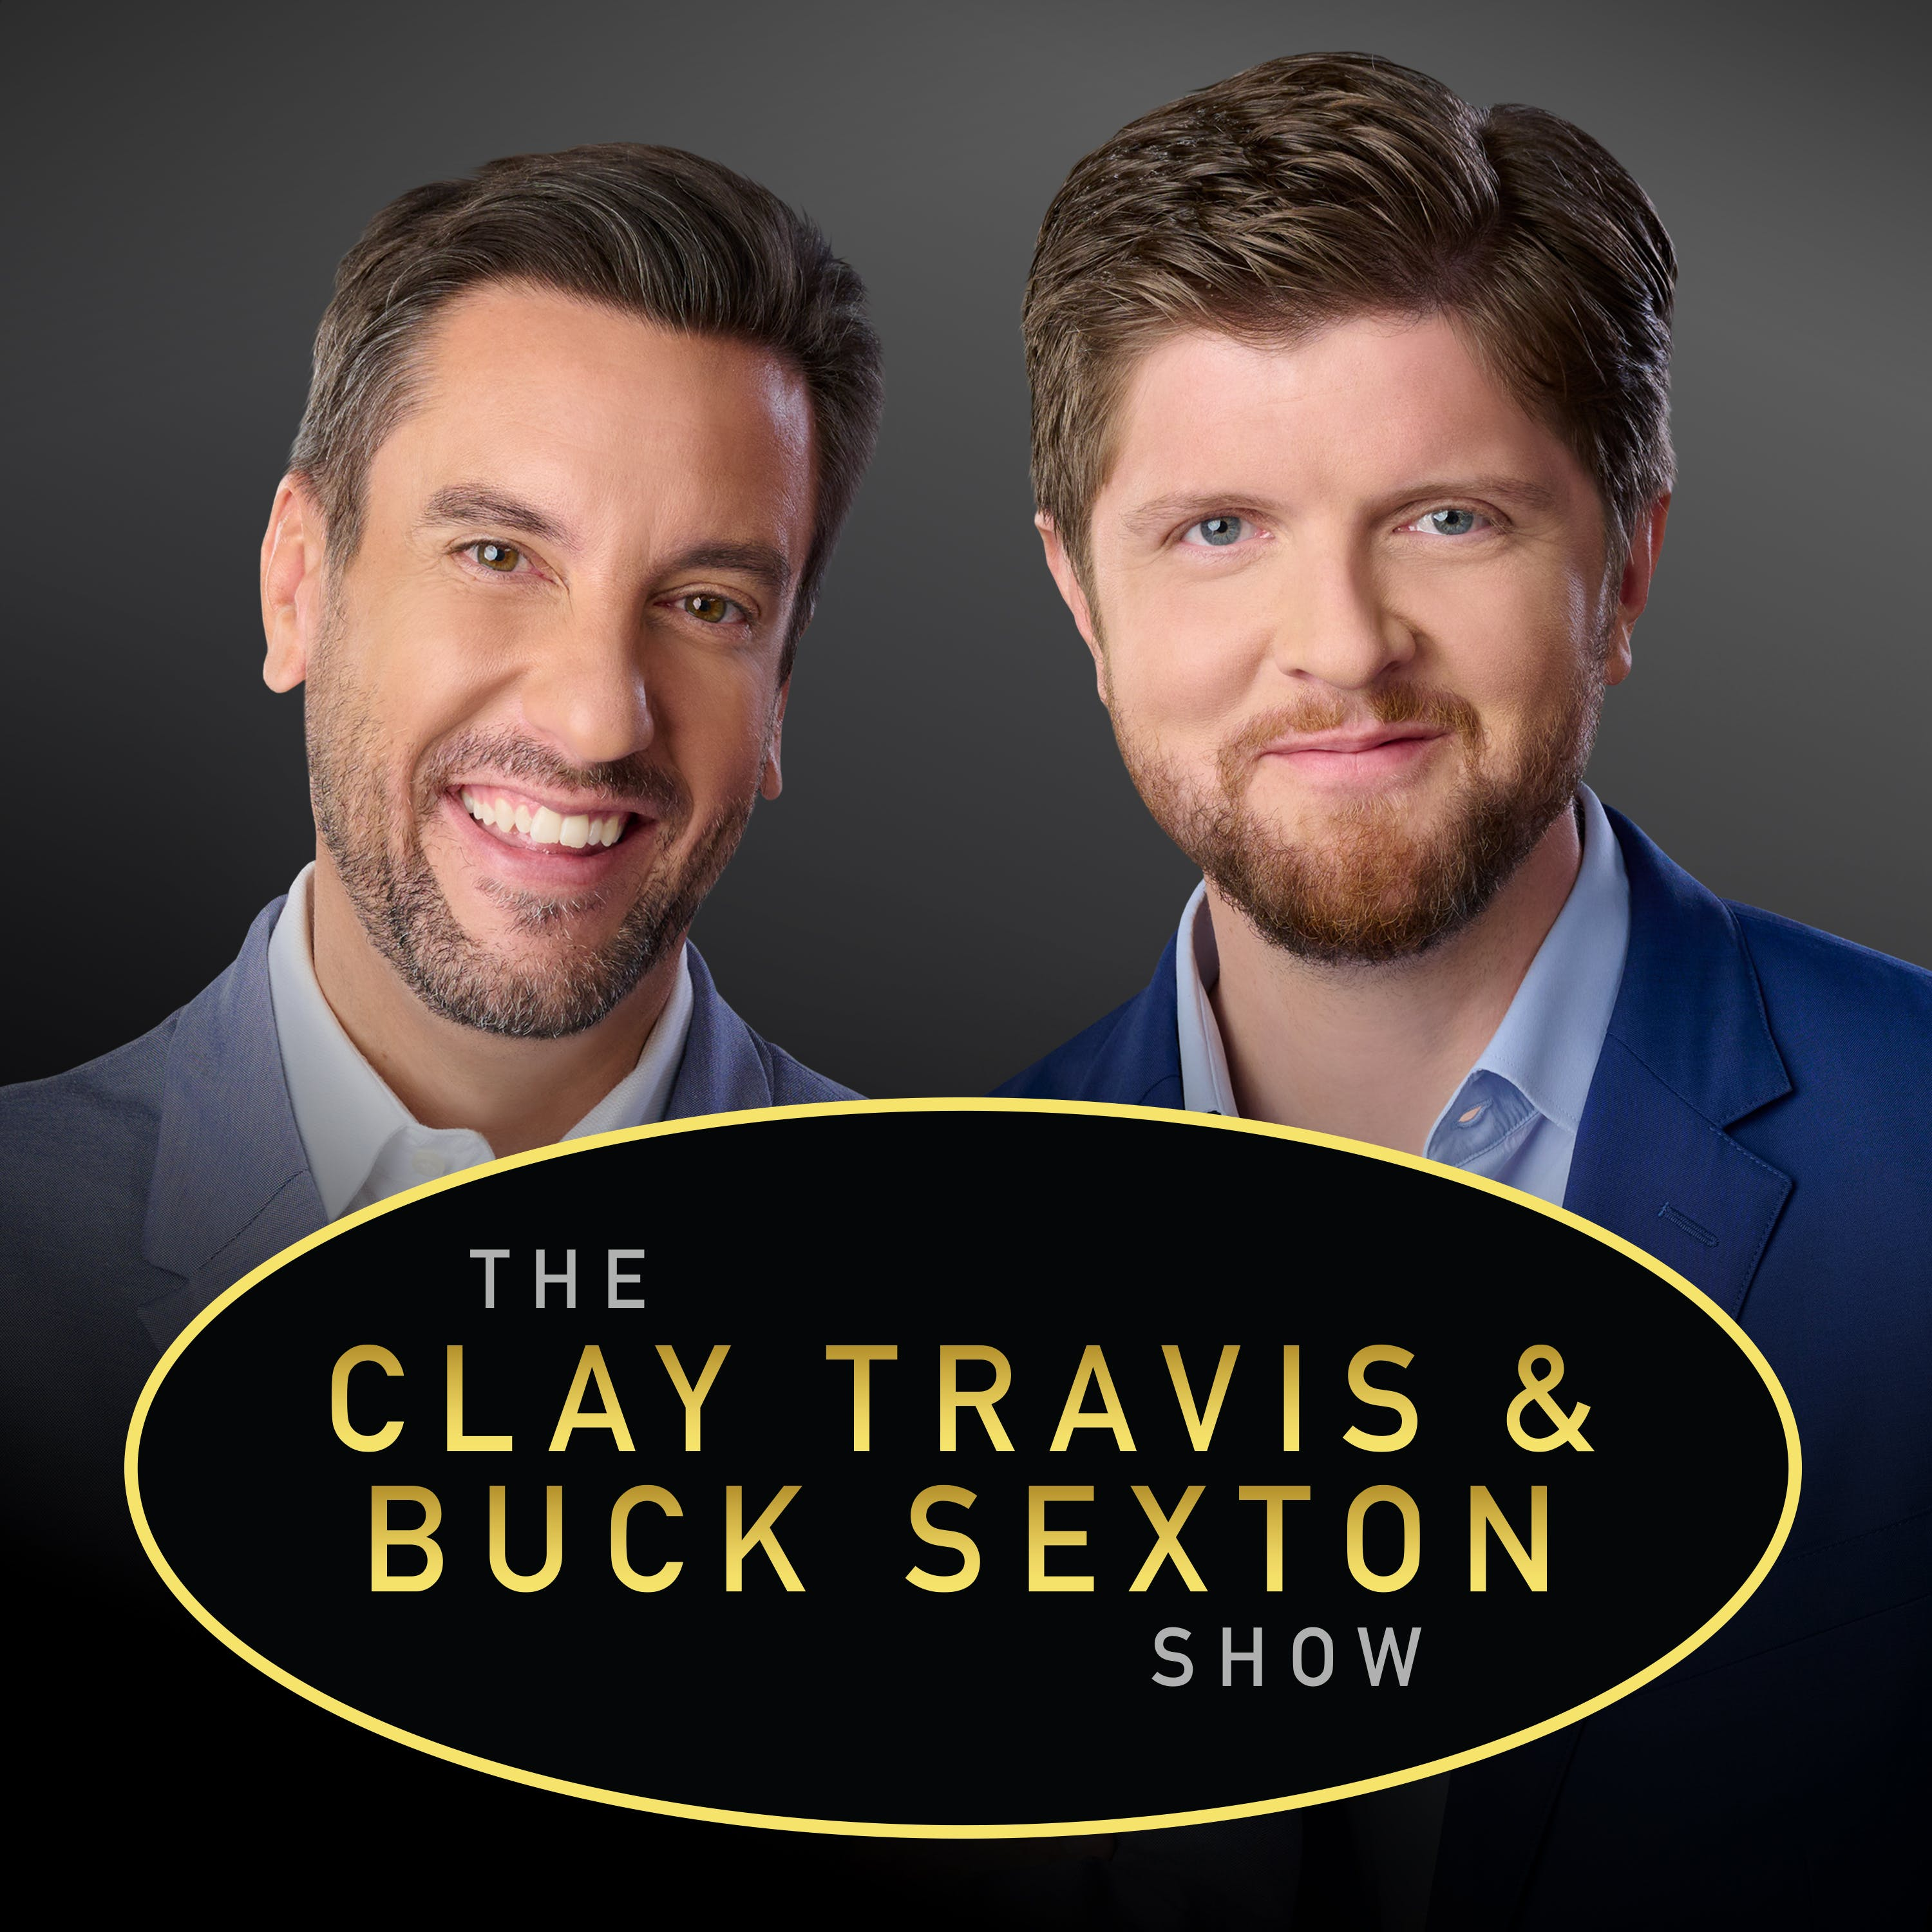 Clay Travis and Buck Sexton Show H1 – Sep 15 2021